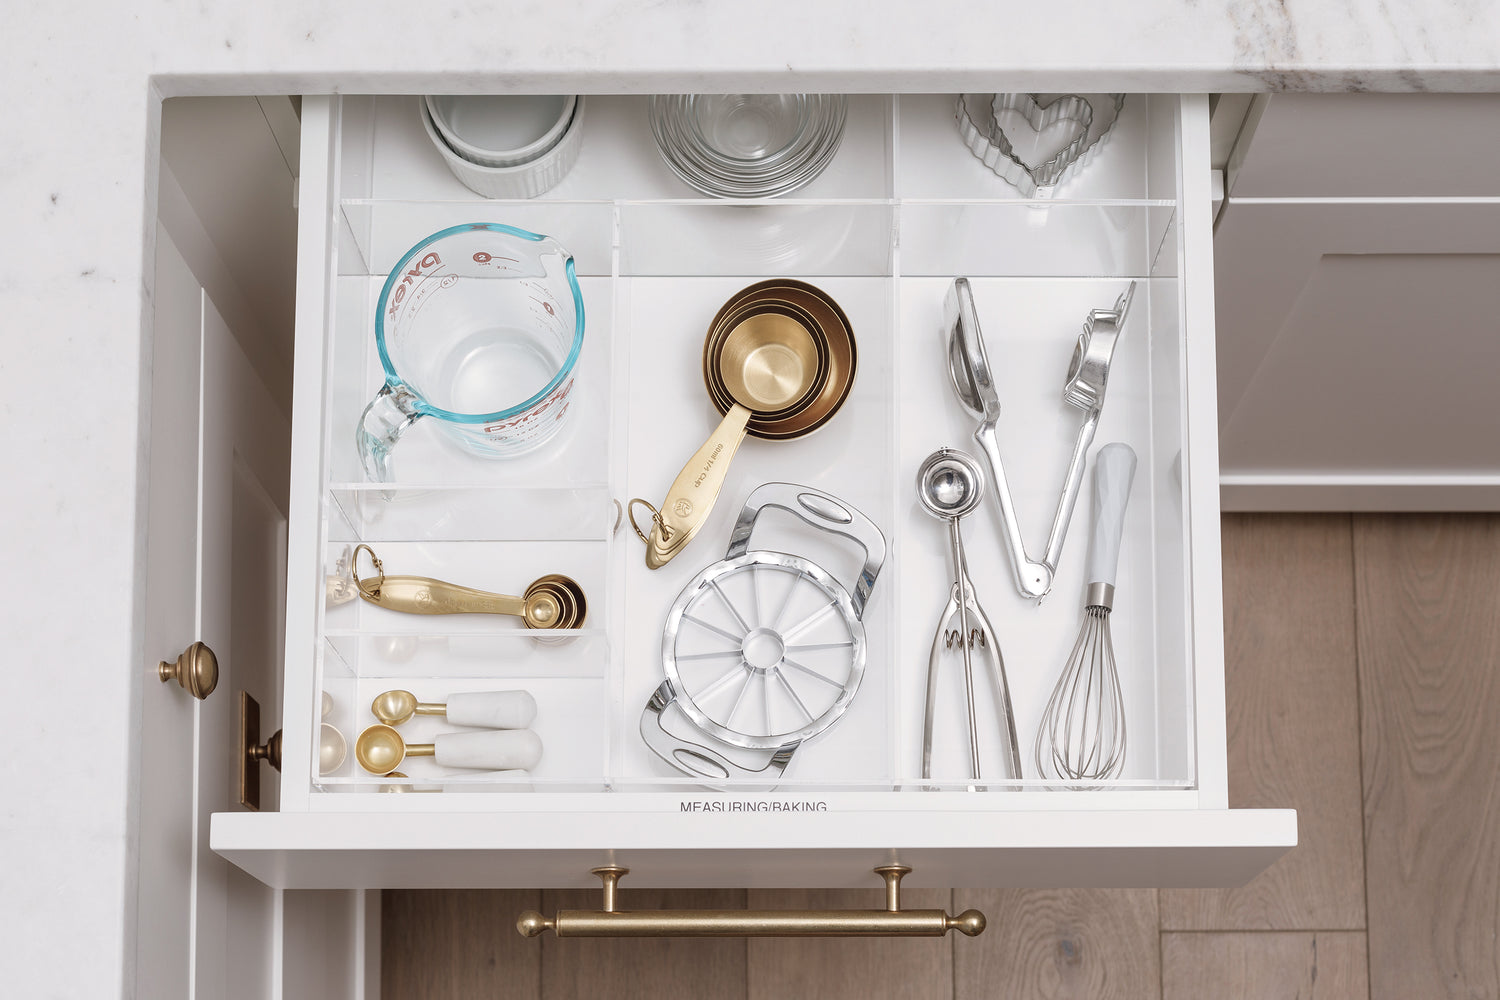 Baking tools and measuring utensils in an open kitchen drawer contained in a custom-fit organizer.